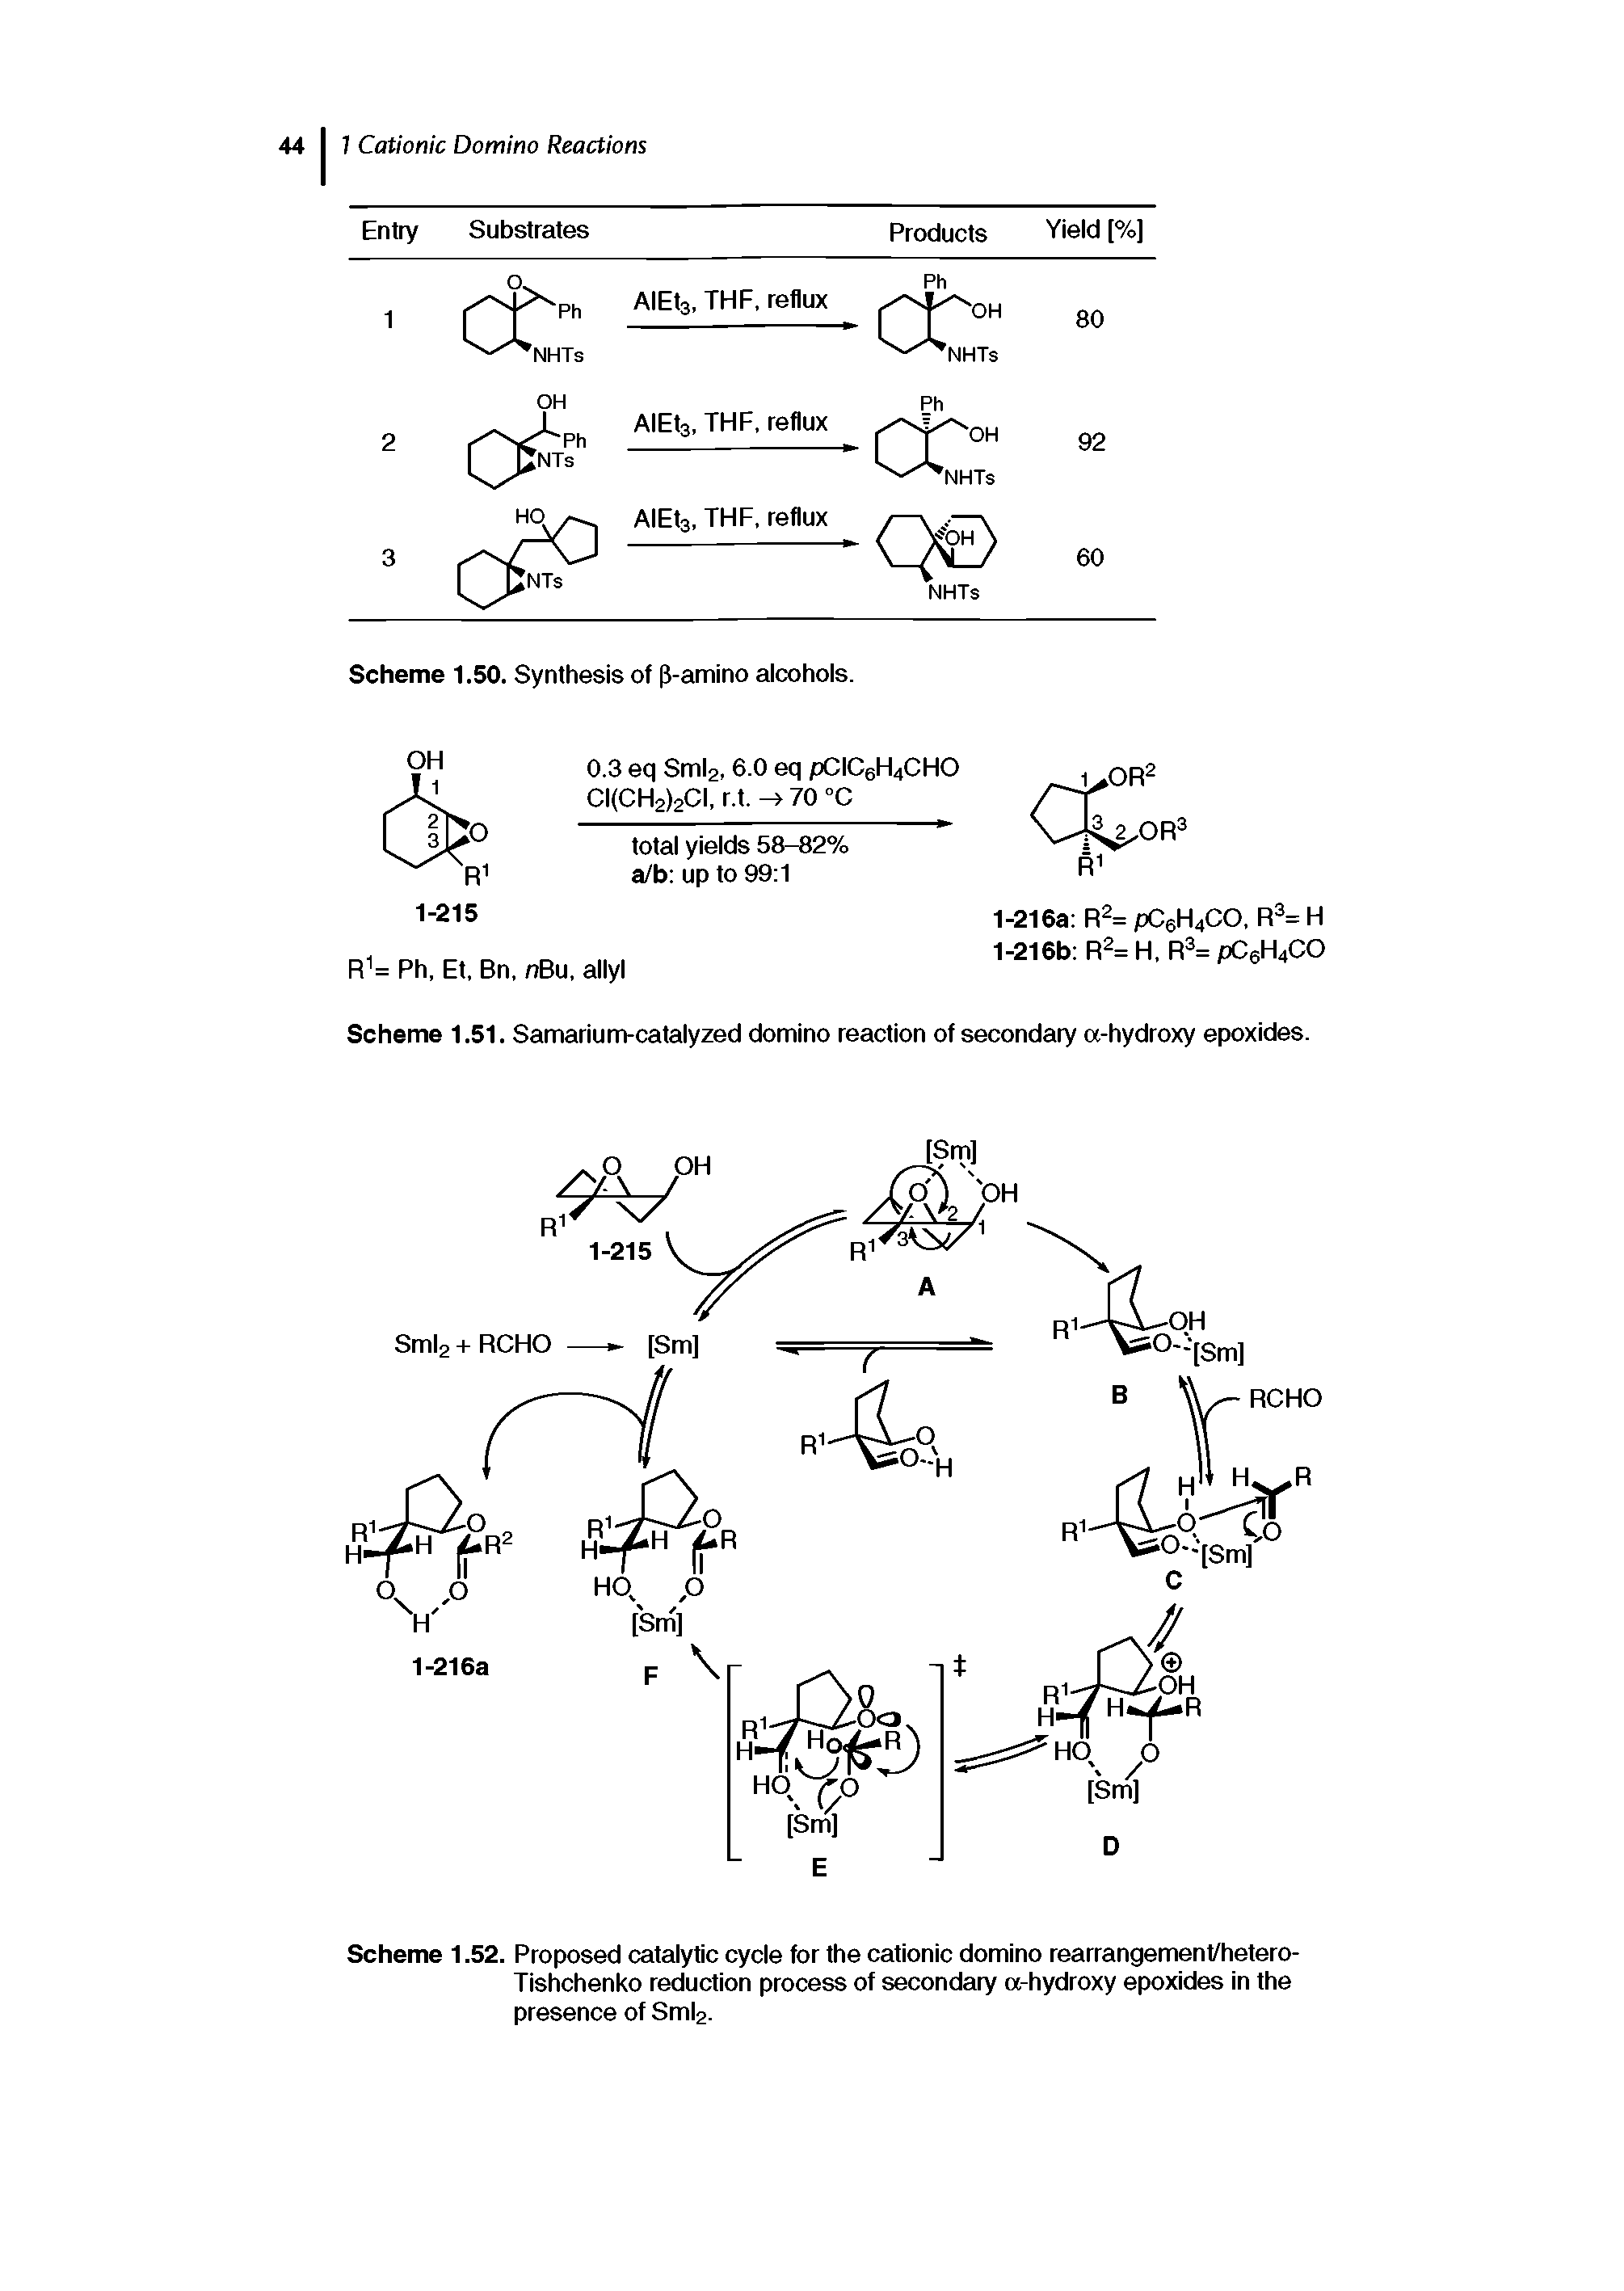 Scheme 1.52. Proposed catalytic cycle for the cationic domino rearrangement/hetero-Tishchenko reduction process of secondary a-hydroxy epoxides in the presence of Sml2.